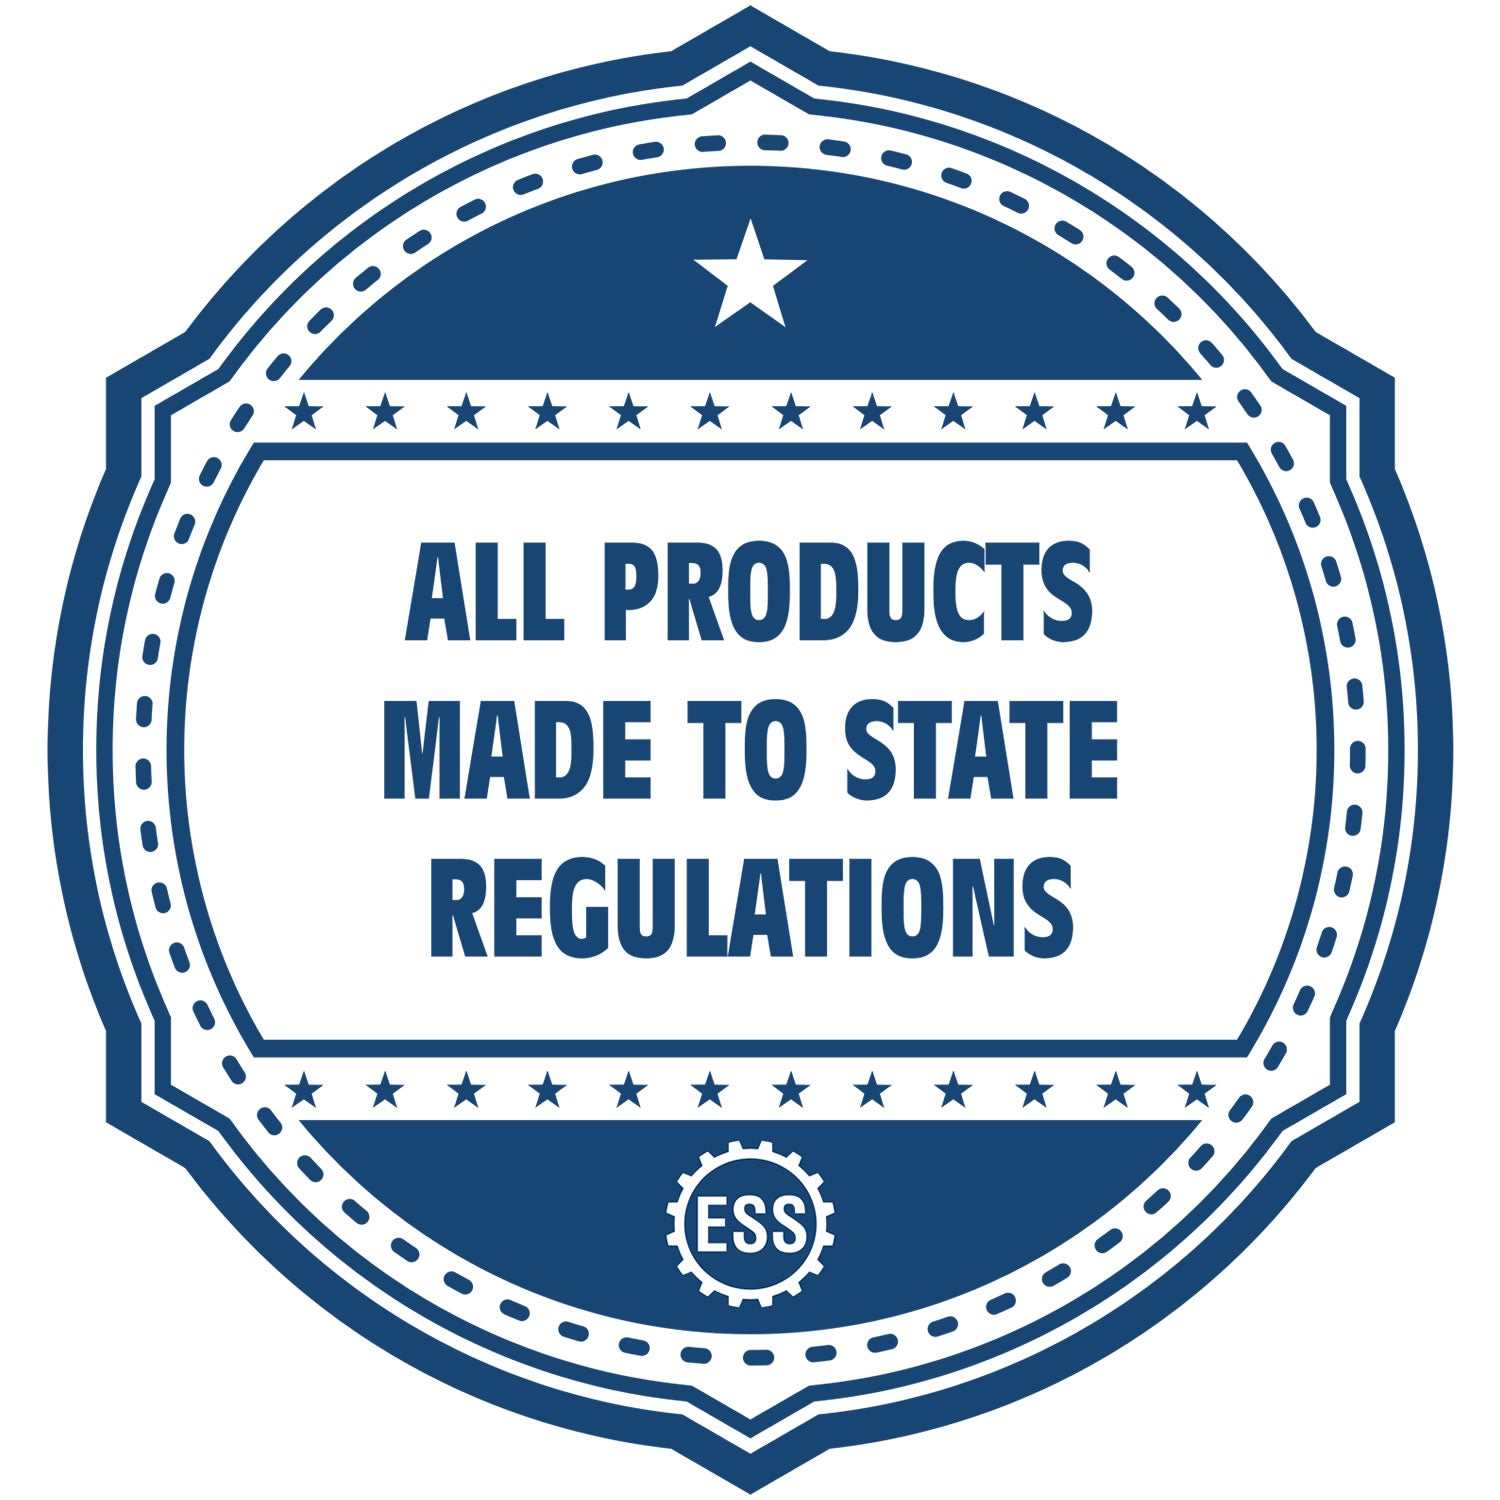 An icon or badge element for the Premium MaxLight Pre-Inked Michigan Landscape Architectural Stamp showing that this product is made in compliance with state regulations.